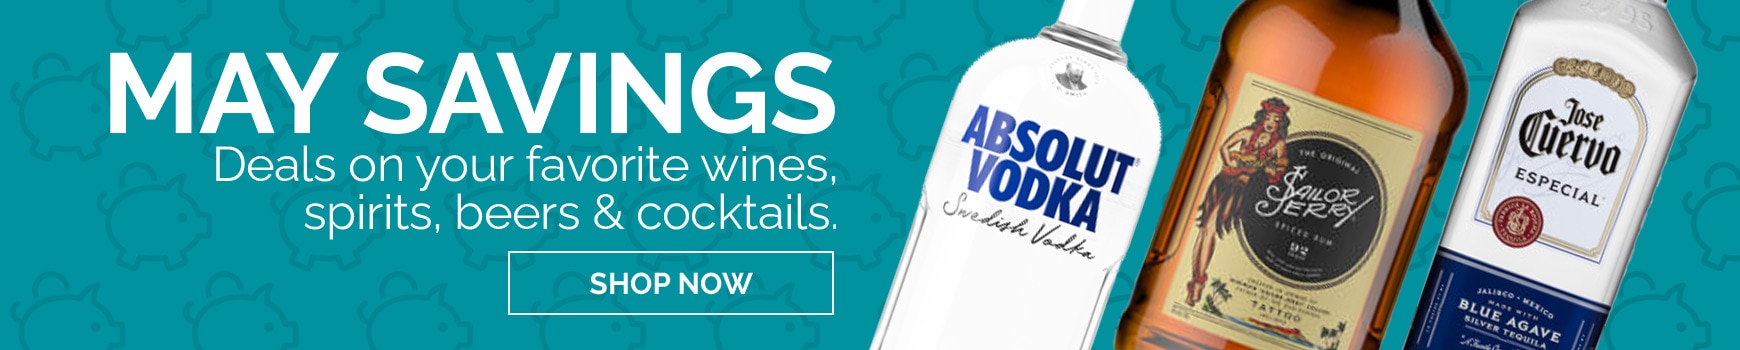 May Savings. Deals on your favorite wines, spirits, beers & cocktails. Shop Now.